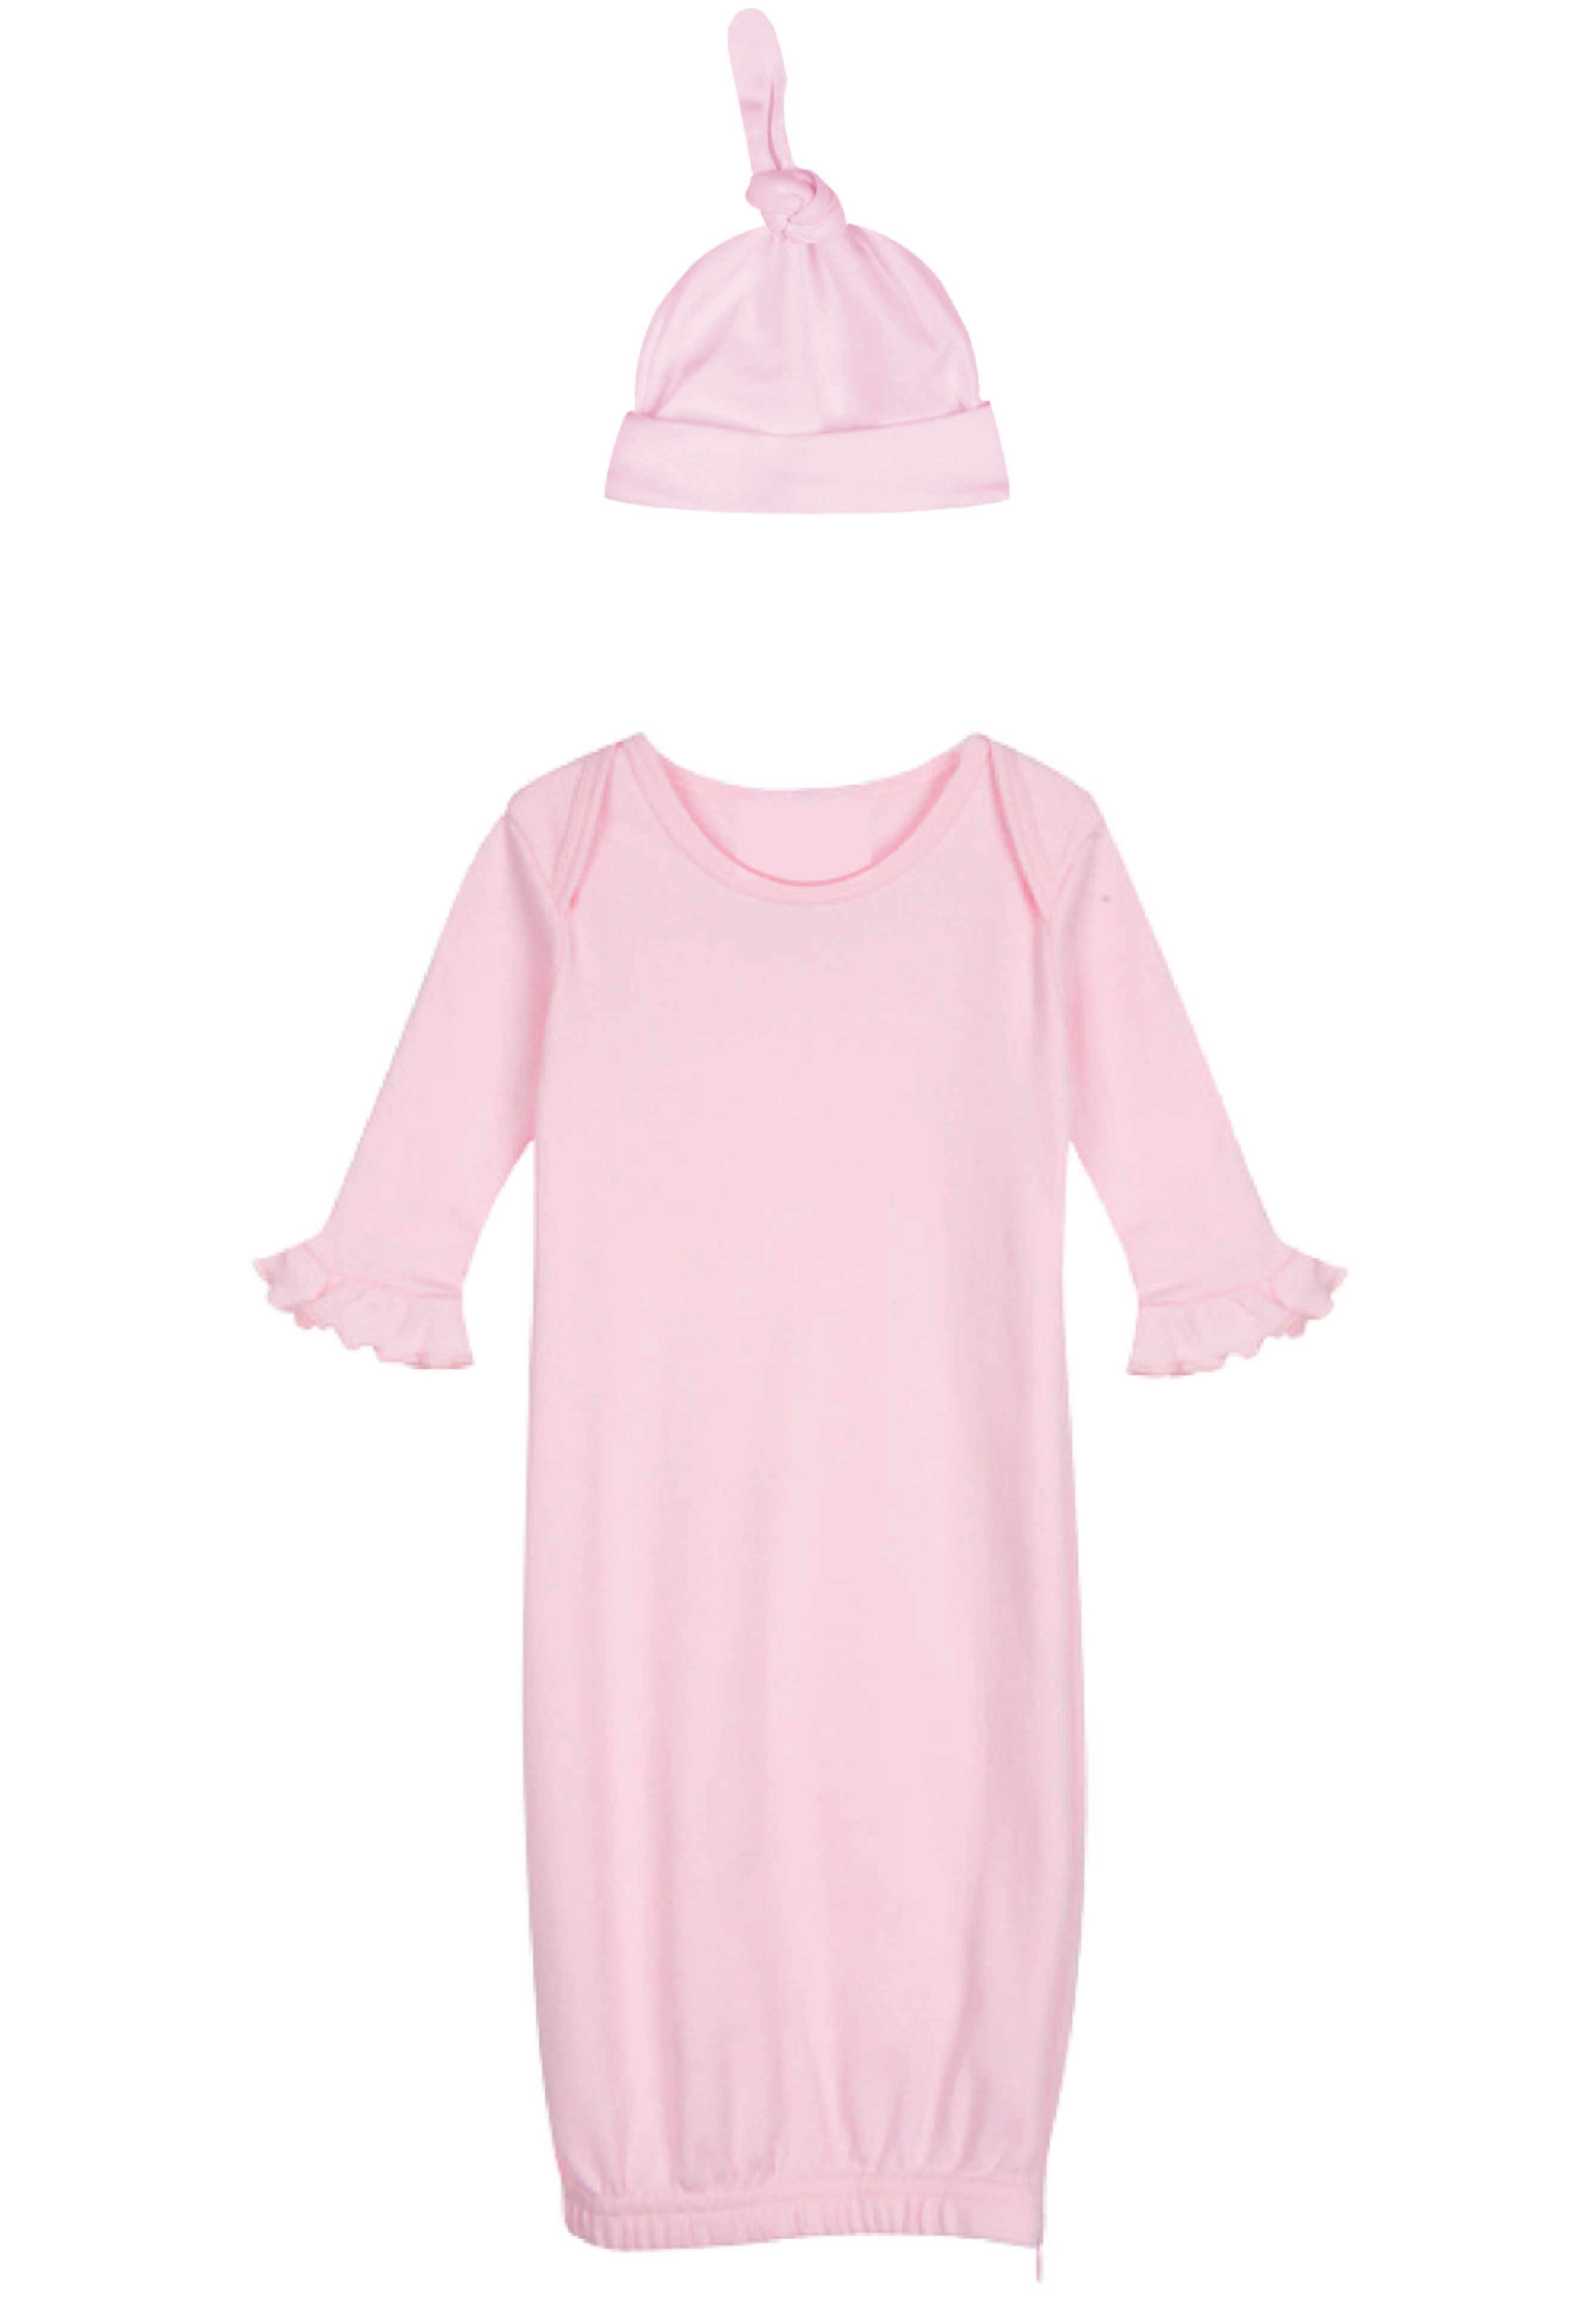 Baby Embroidery Sleep Gown (with Ruffle Sleeves) Set, Pink Color